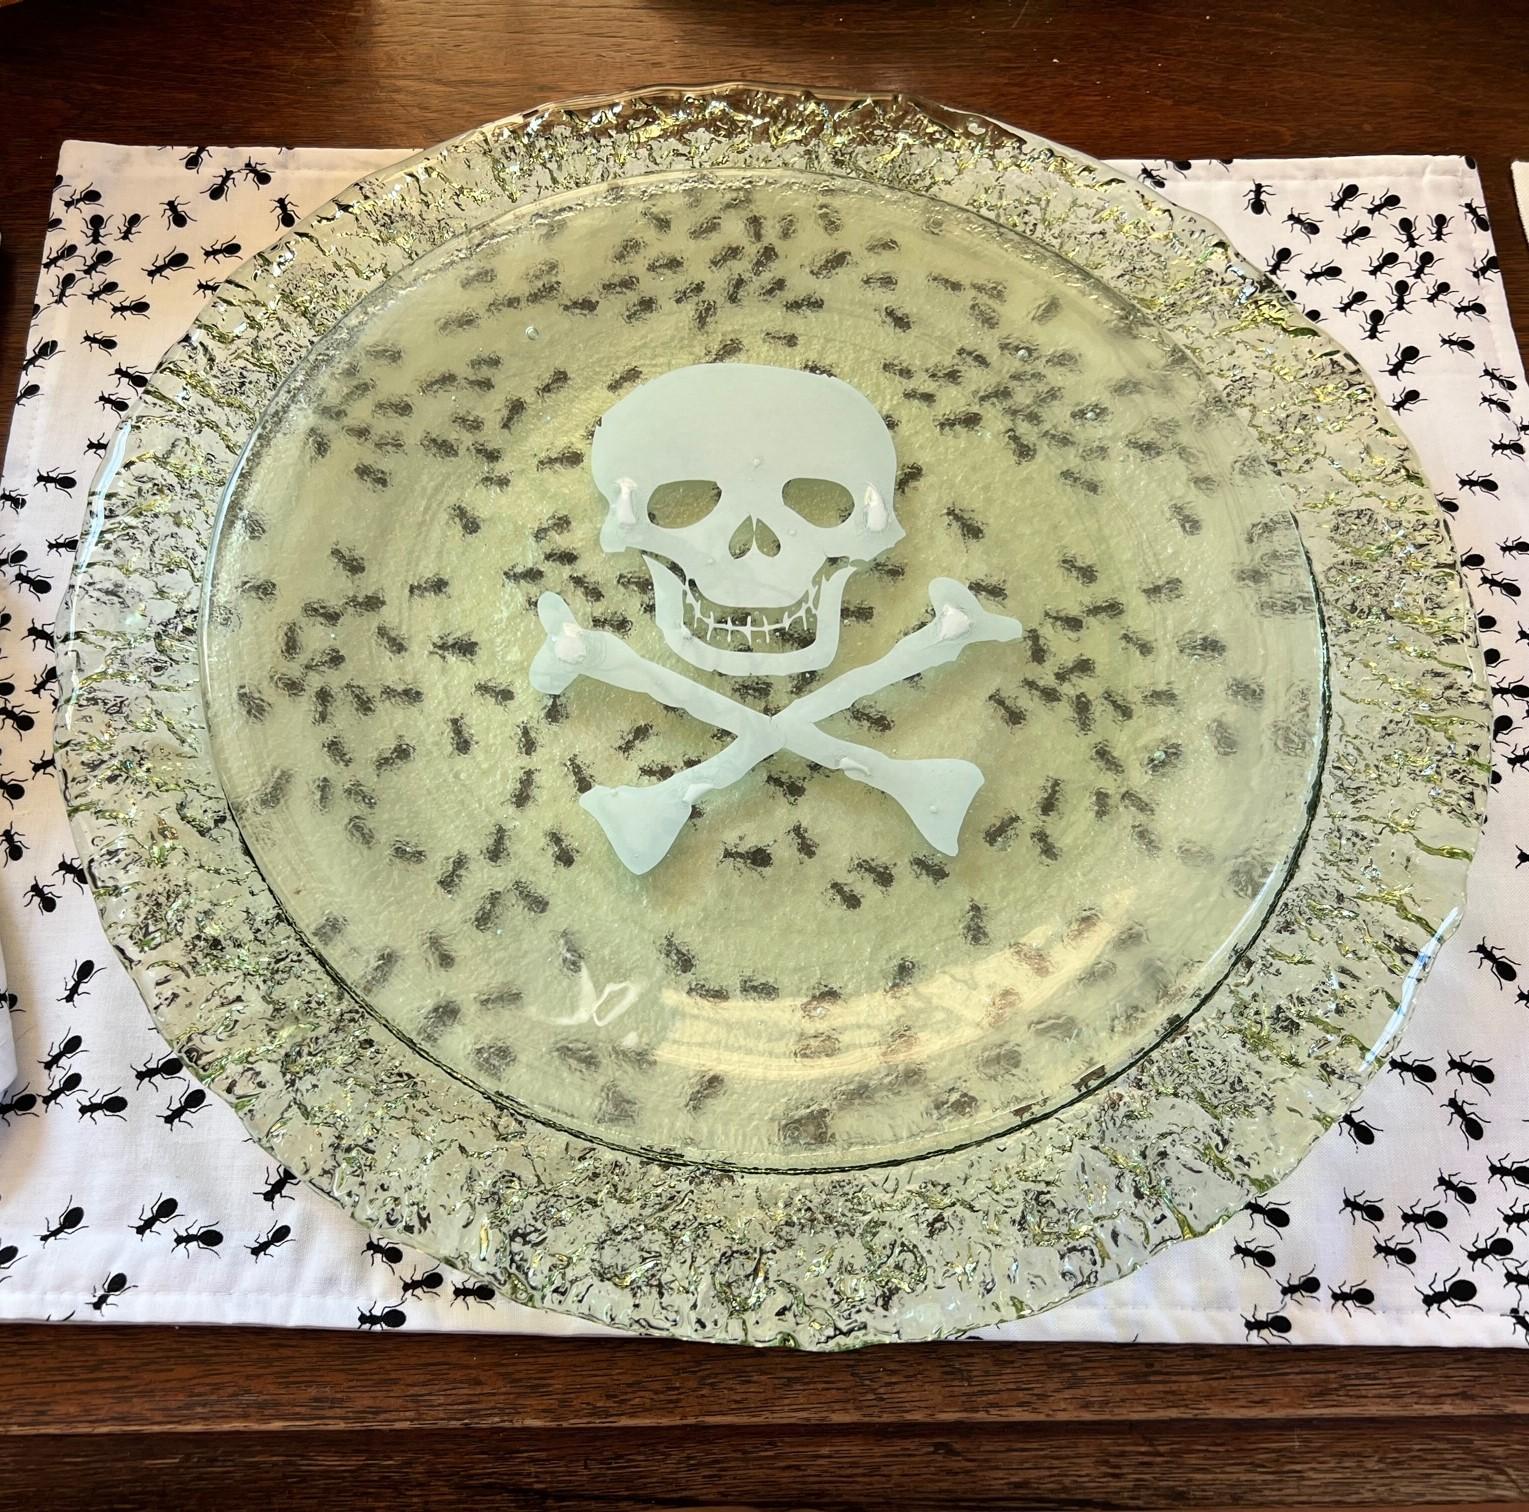 Late 20th C. Set of 8 Seeded Glass Dinner Plates with White Skull and Crossbones In Good Condition For Sale In Morristown, NJ